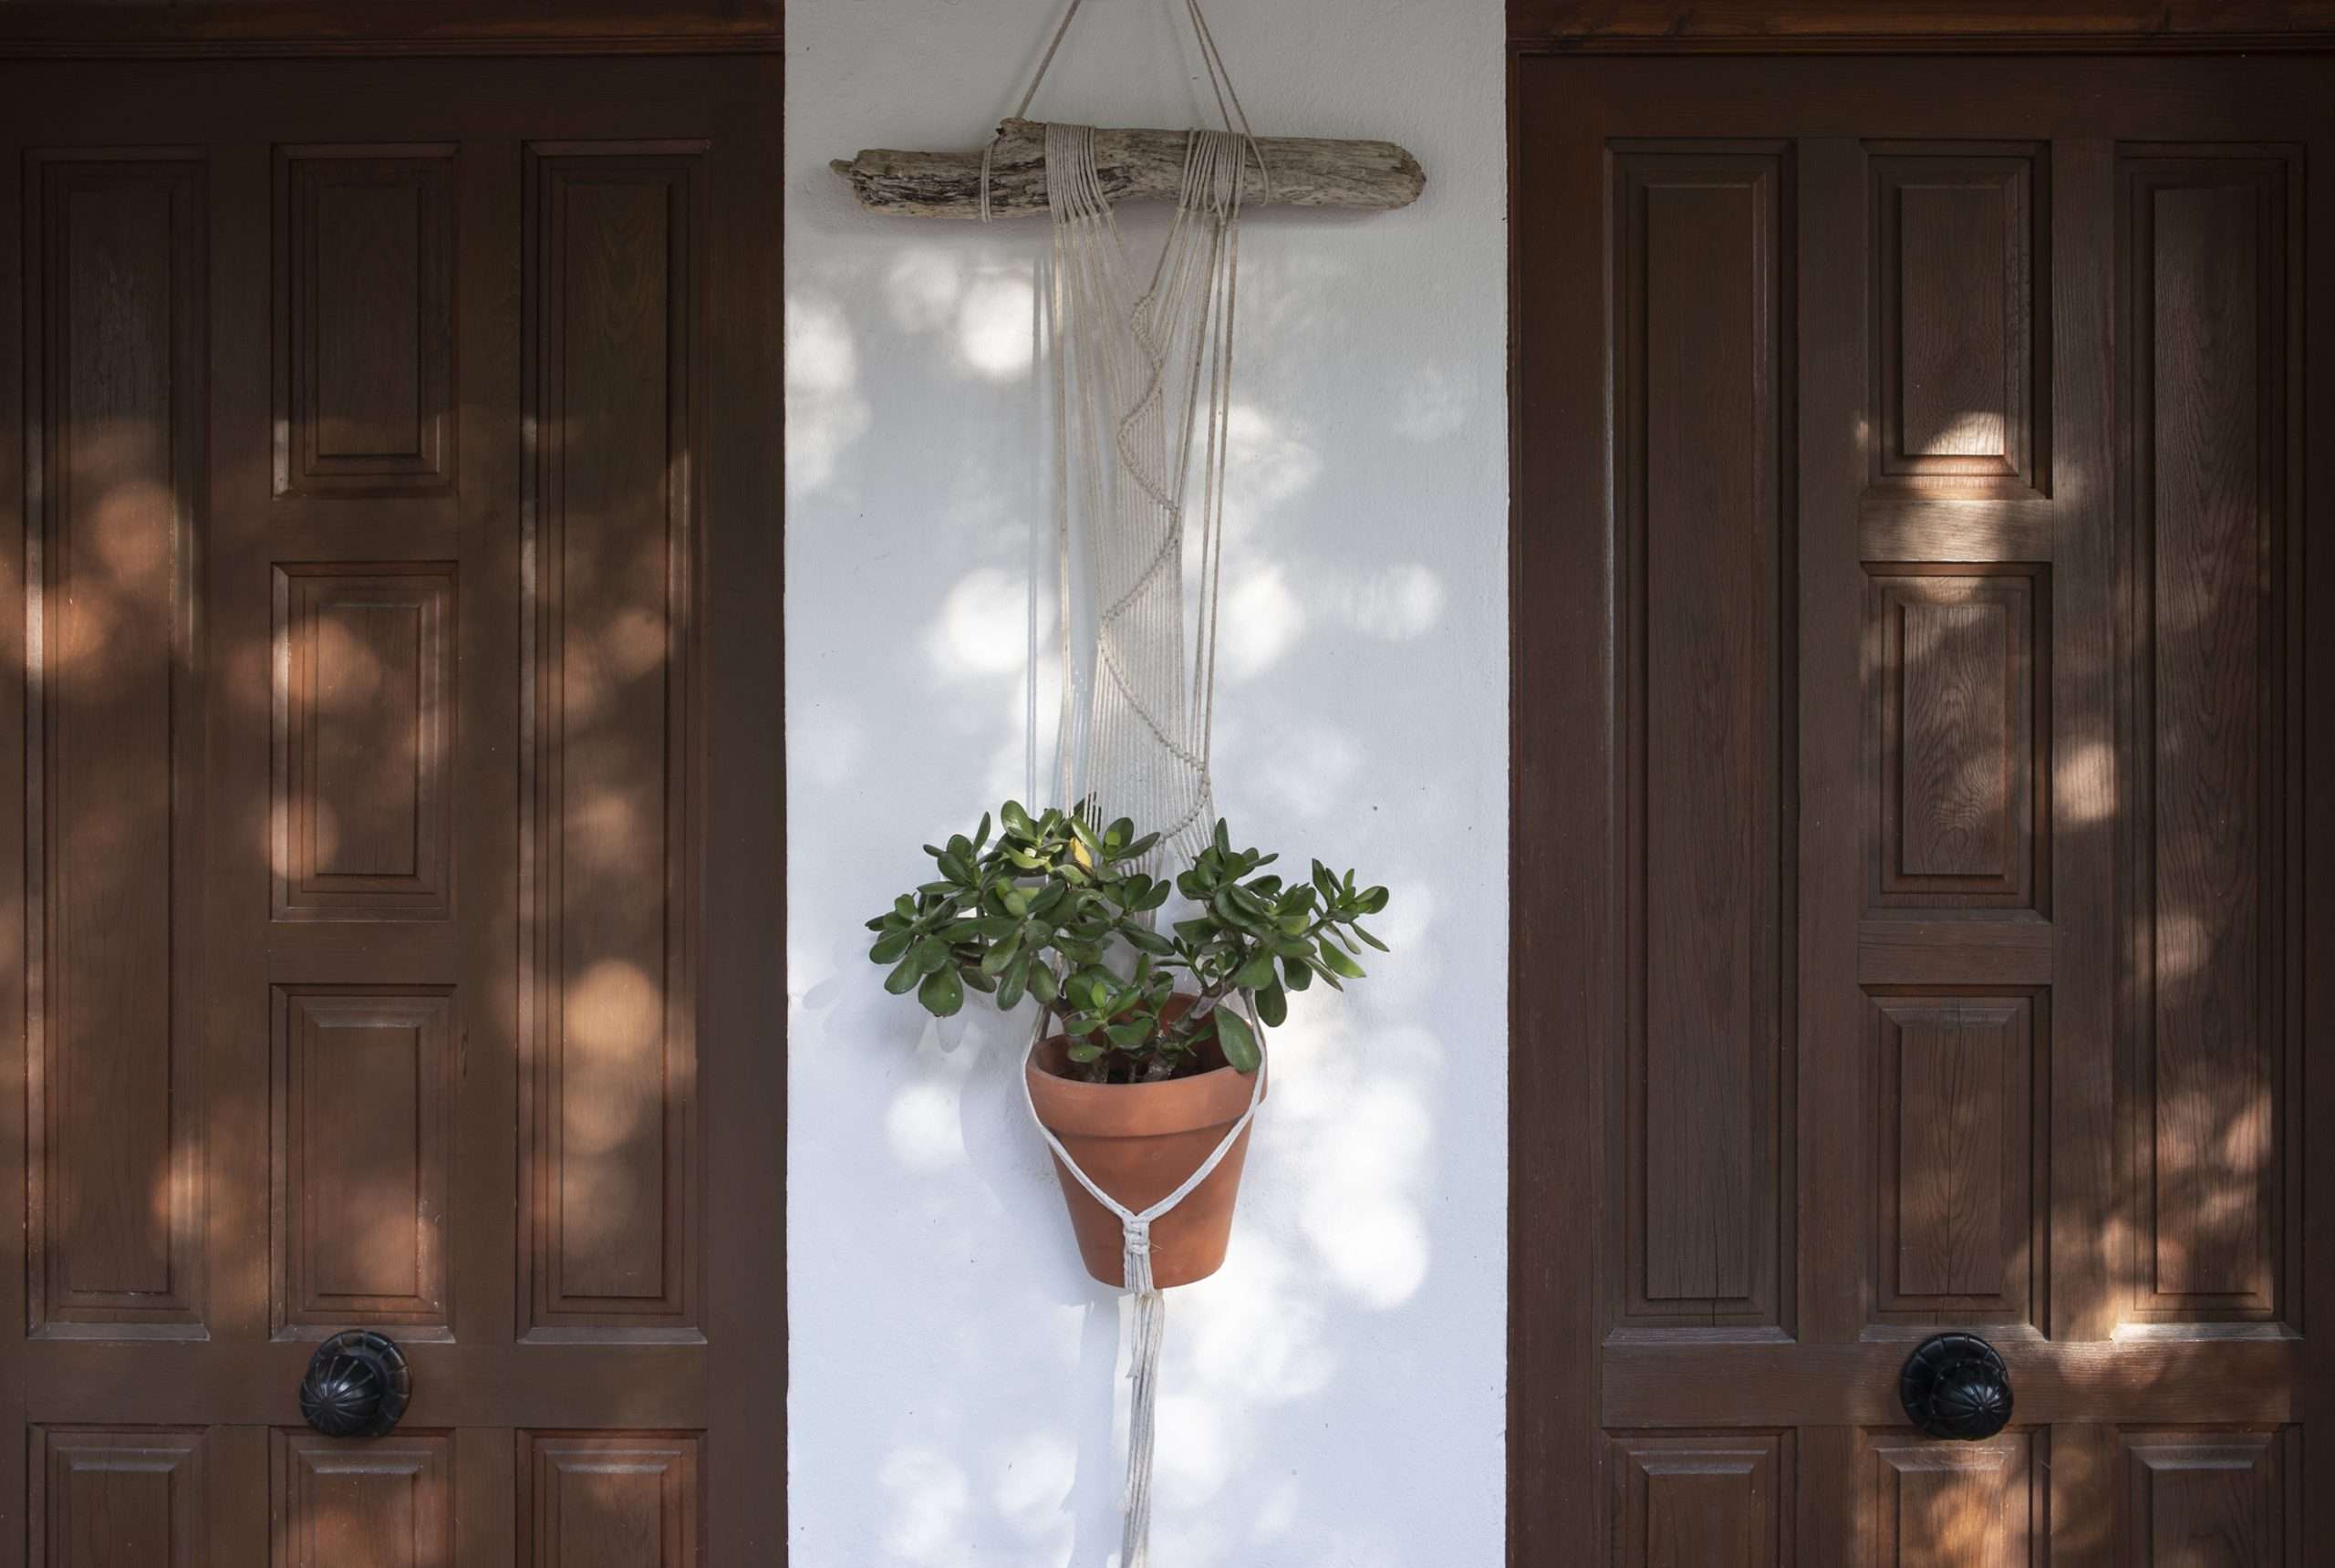 2 wooden doors and a macrame with a plant in between them